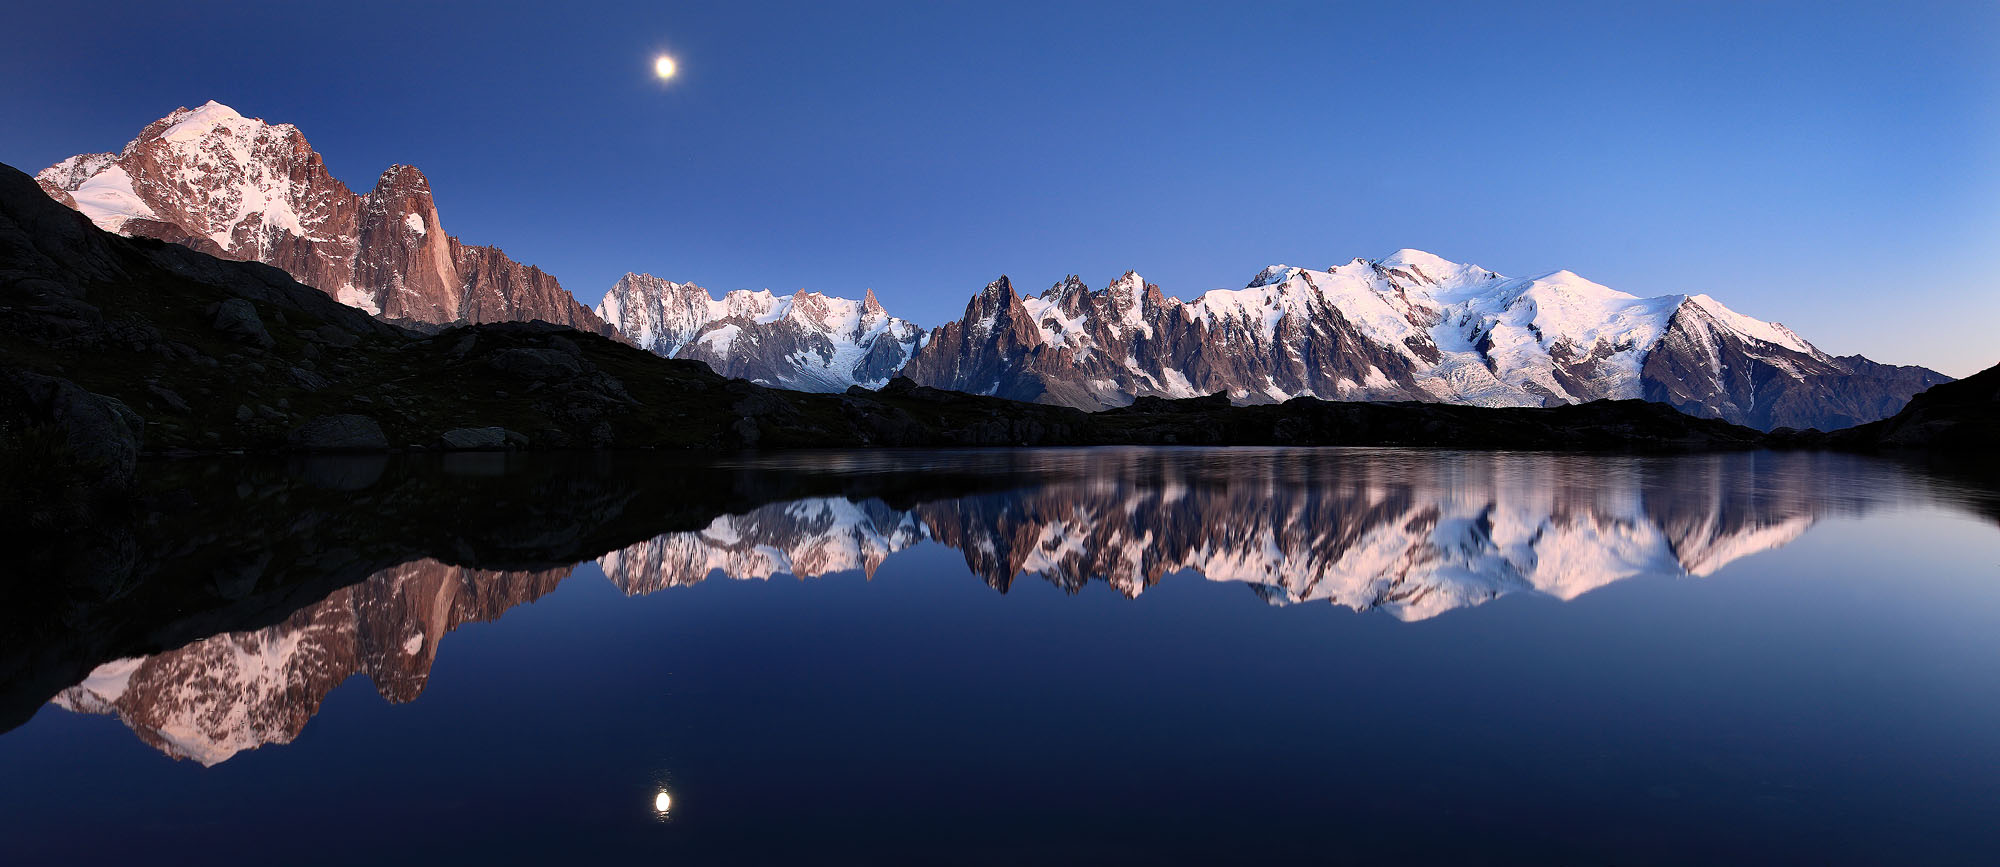 At dusk Lac de Cheserys in the French Alps is reflecting the Mont Blanc massif with the rising moon